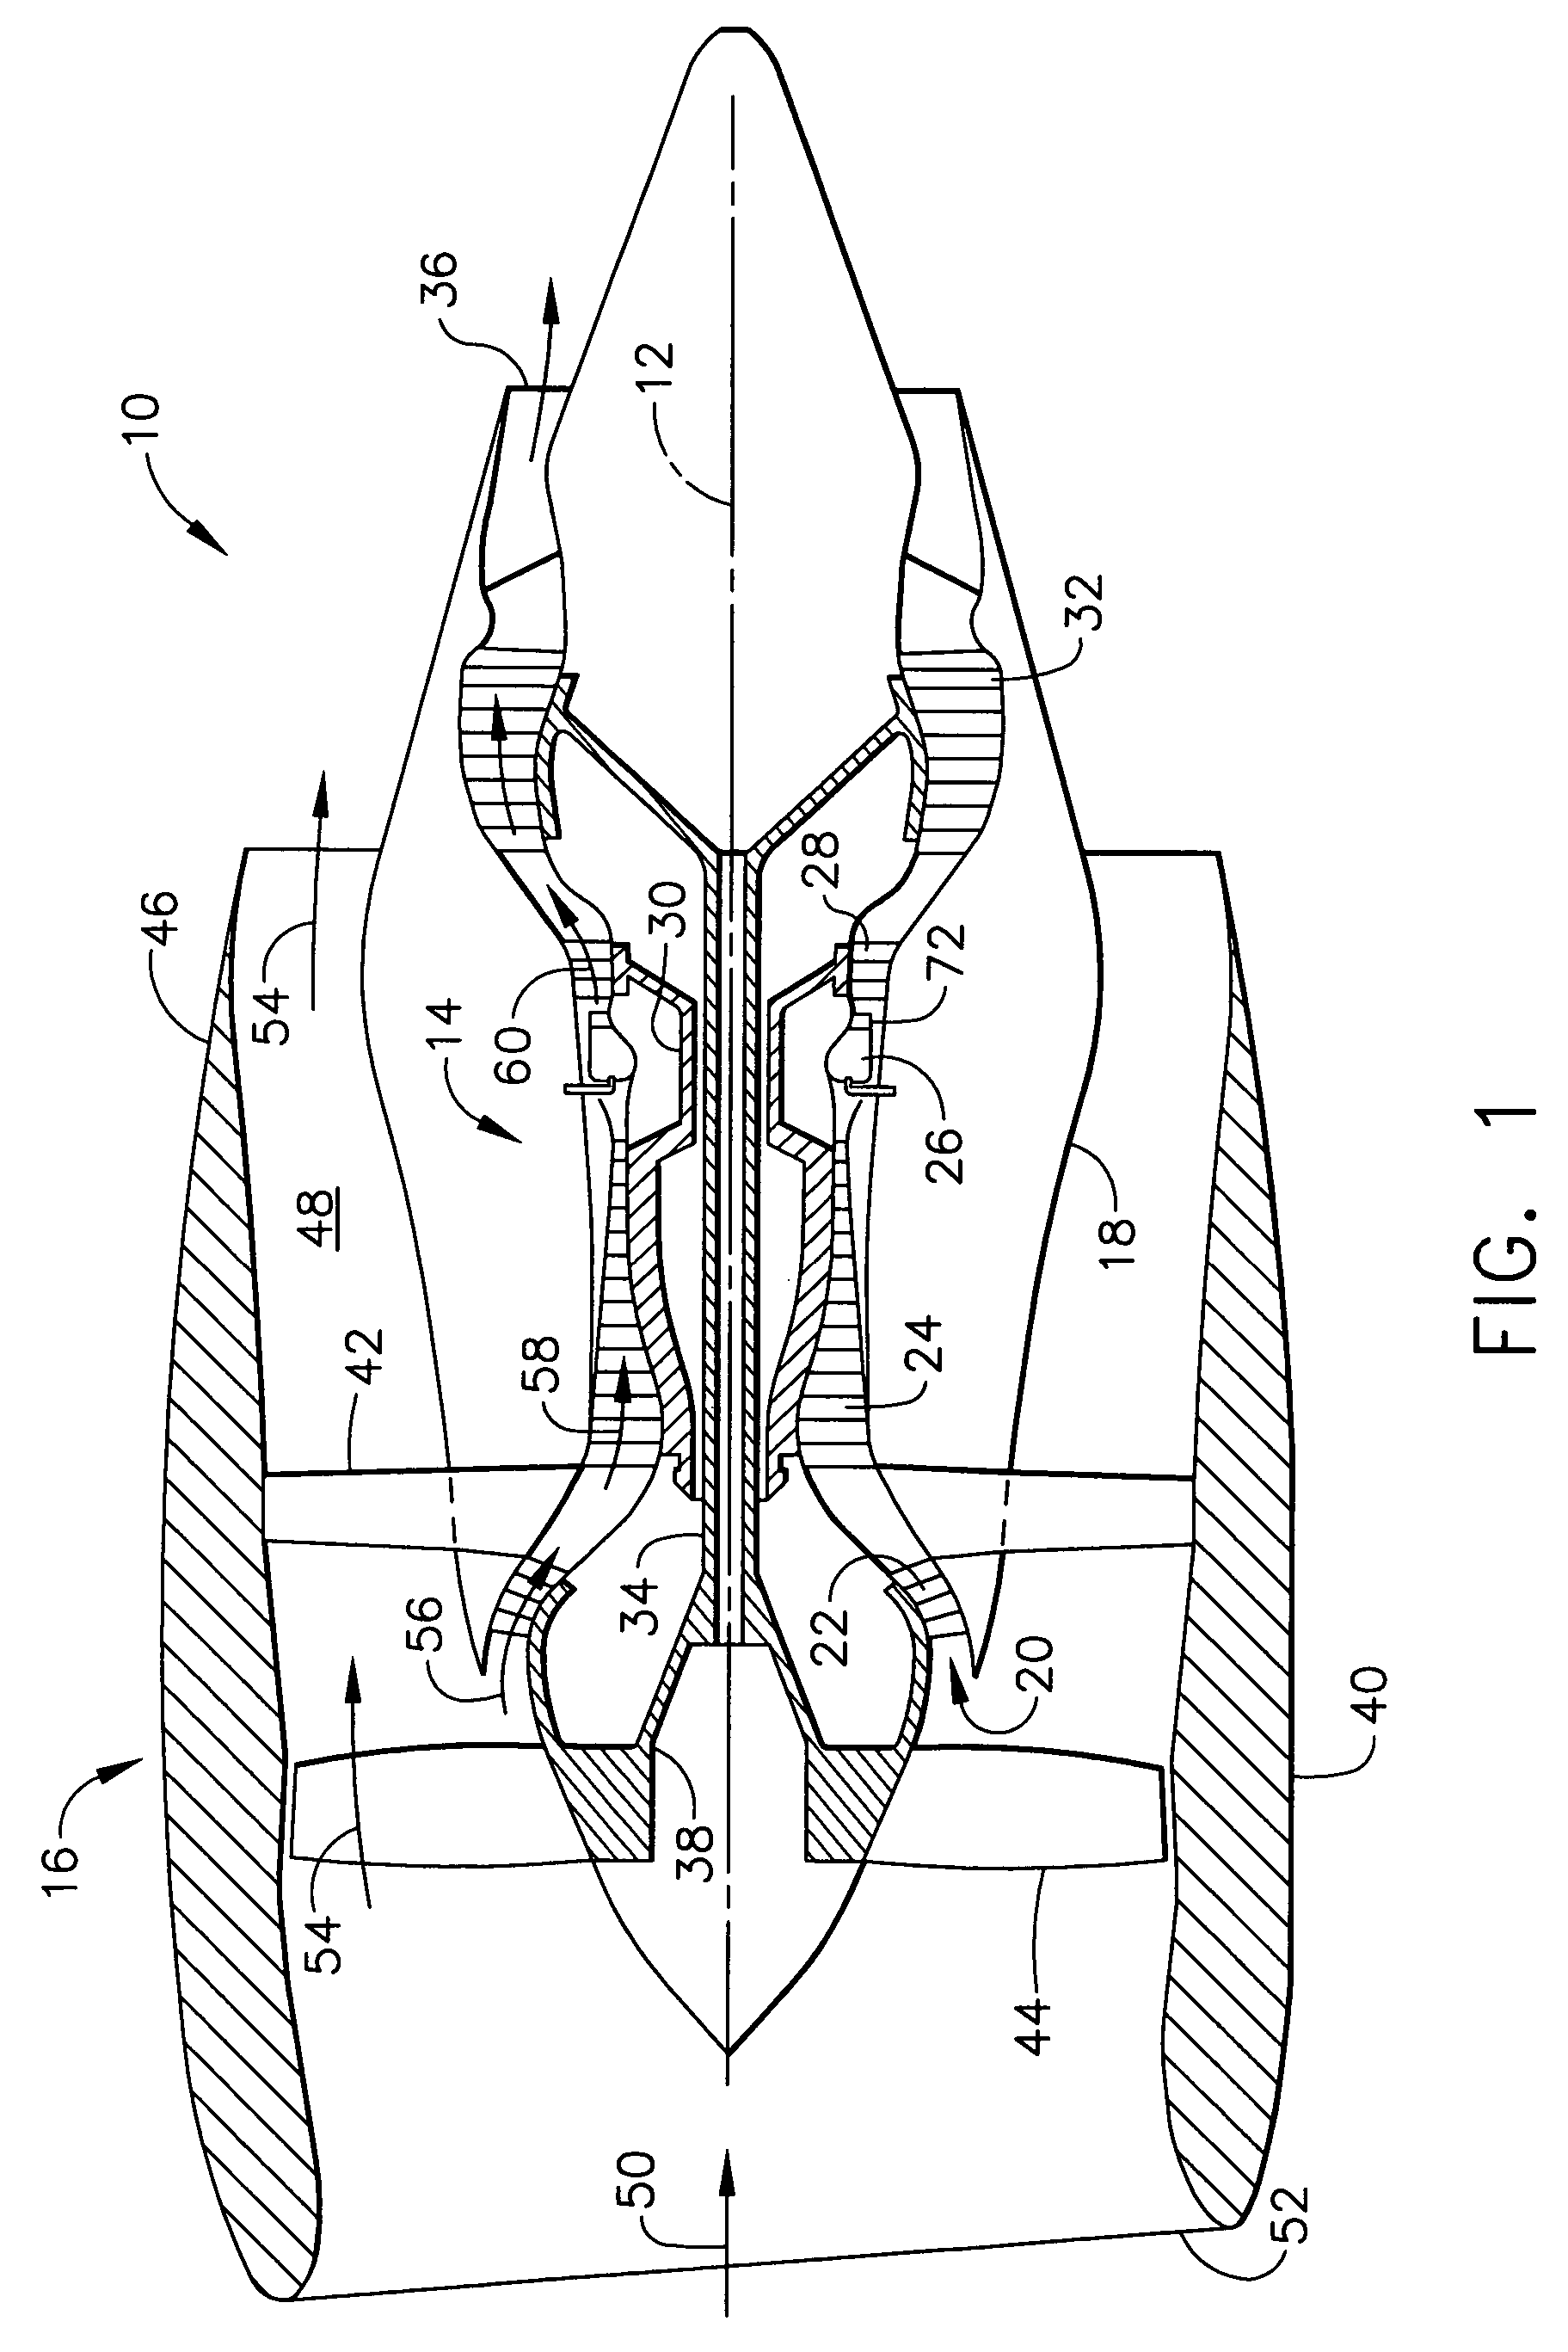 Pilot fuel injector for mixer assembly of a high pressure gas turbine engine